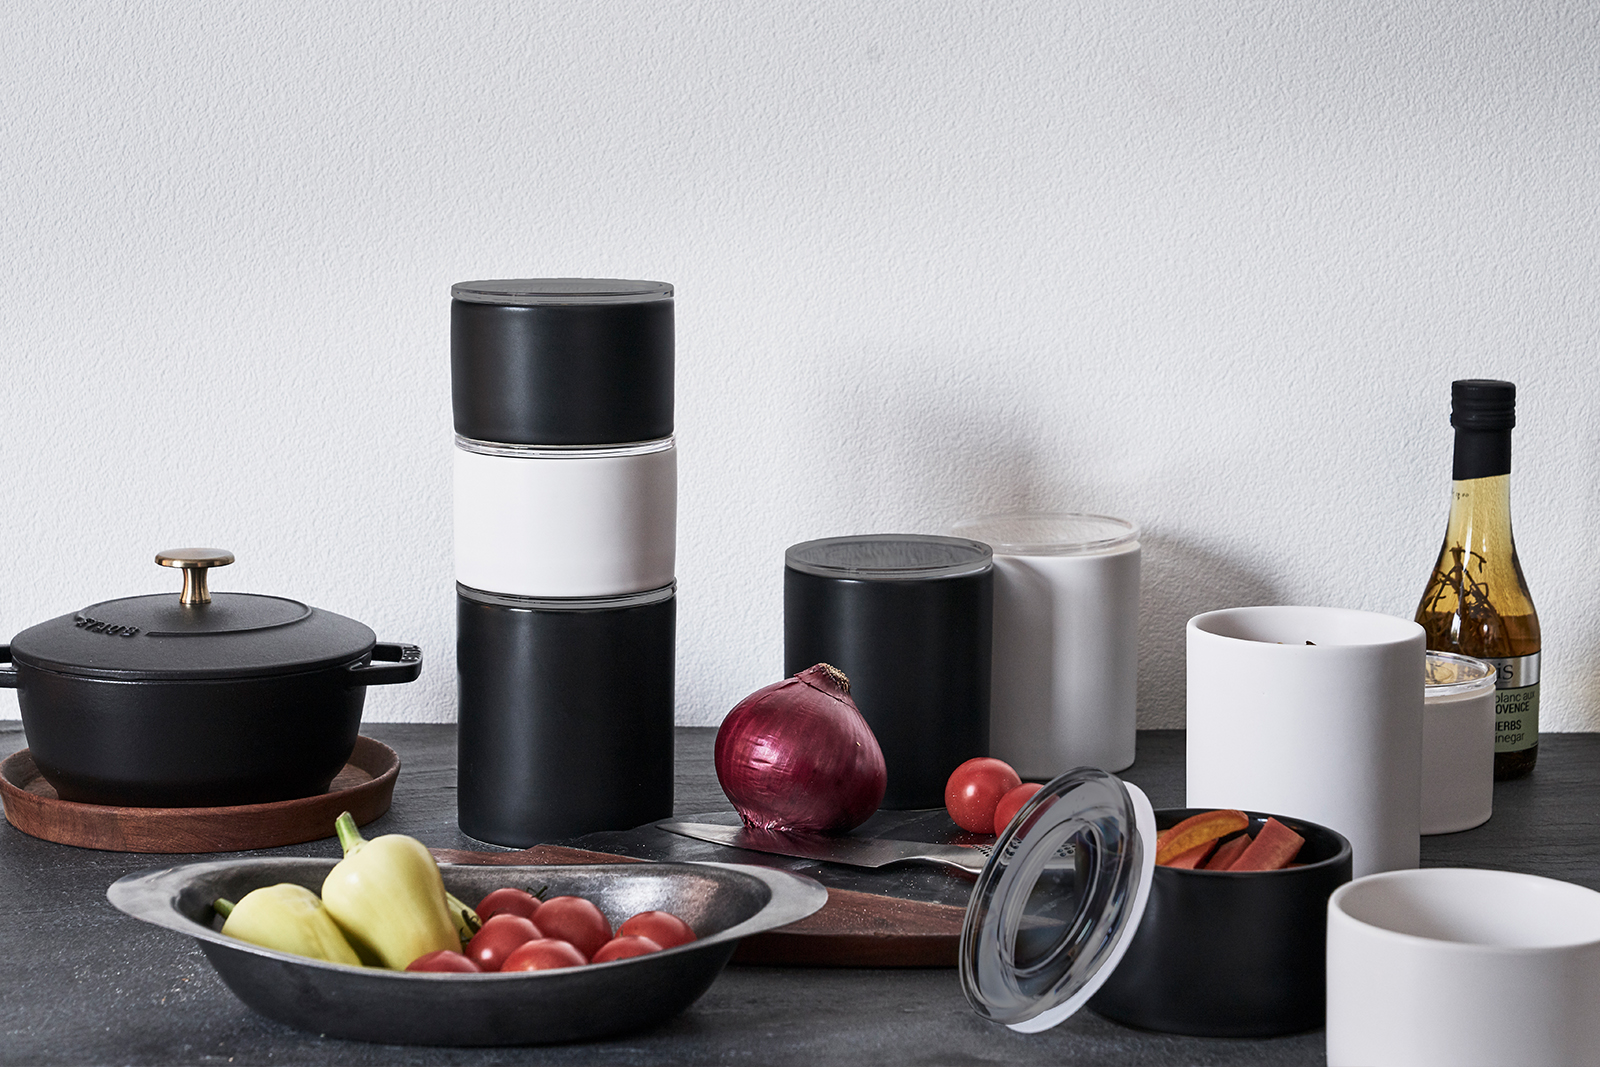 Group shot of Yamazaki Home Ceramic Canister in black and white. 